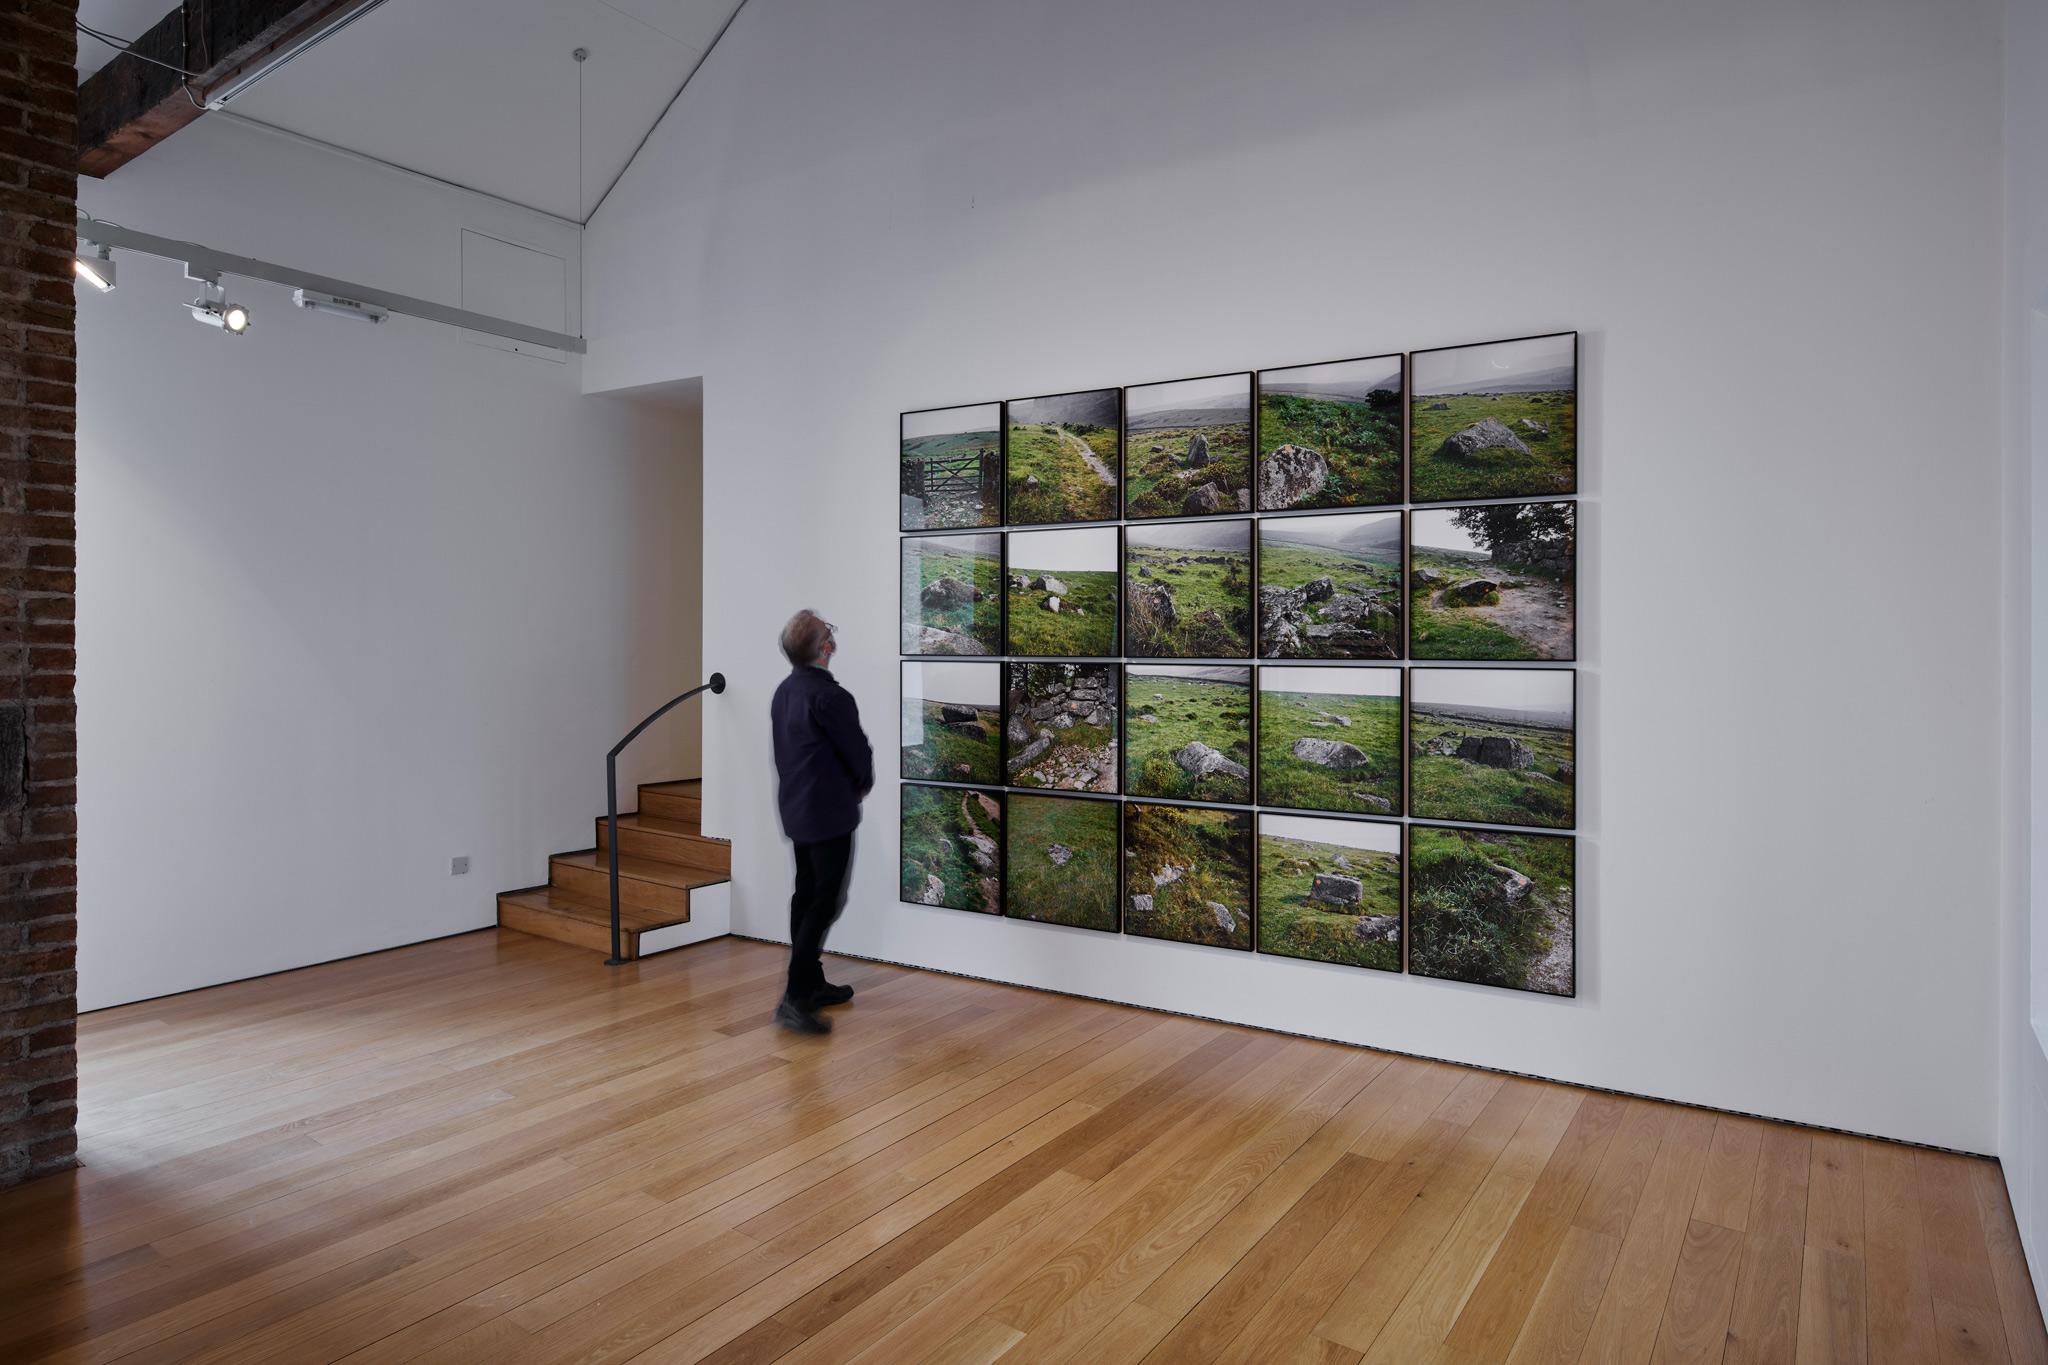 gallery space with a grid of twenty images of orange dots along a grassy trail 